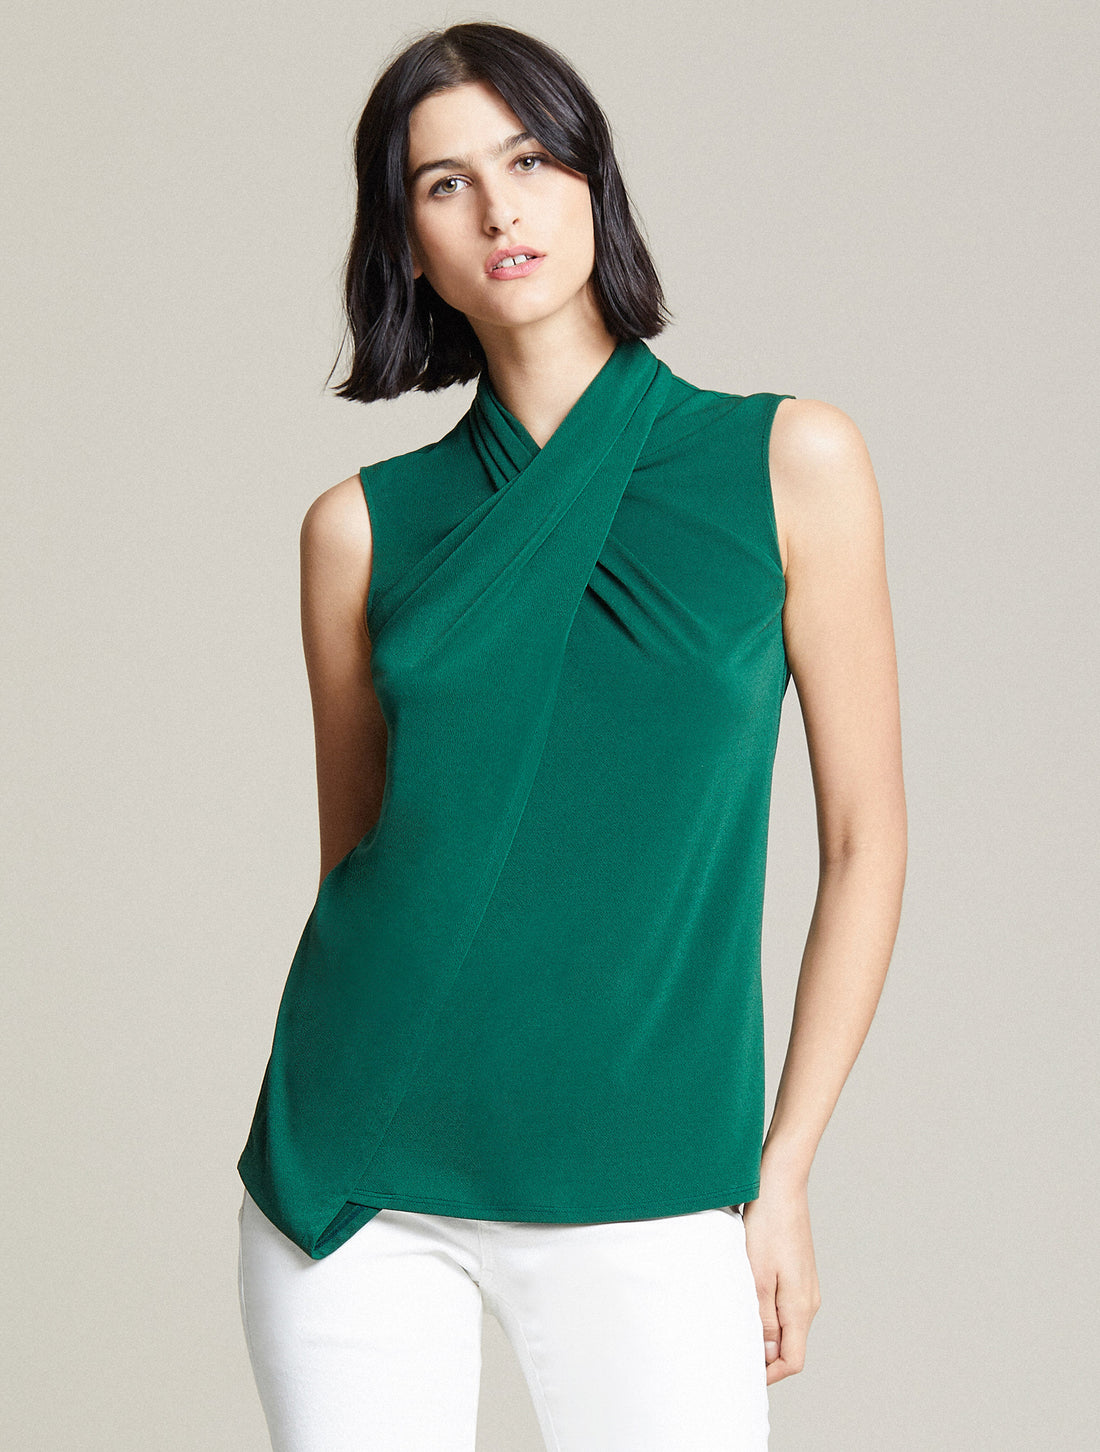 Halston - Cross Neck Top - 2020 Ready To Wear Collection